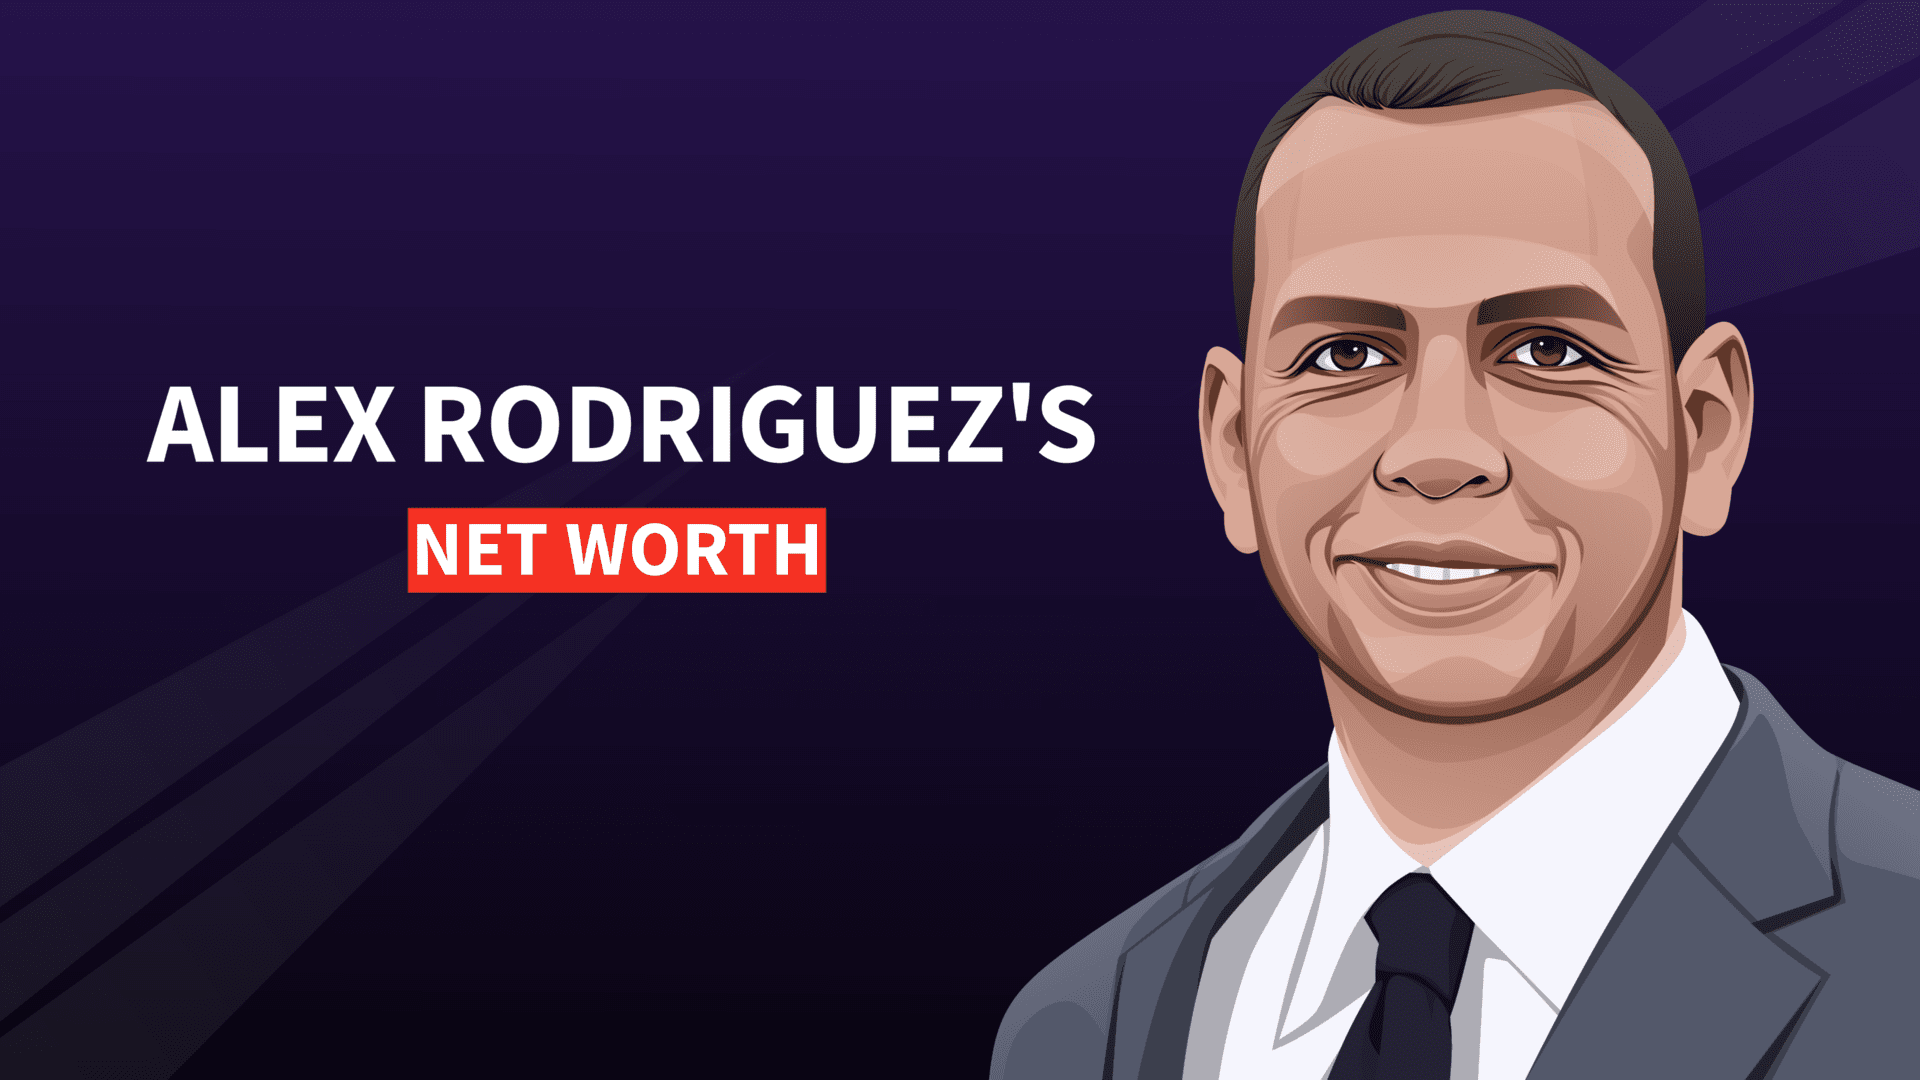 Alex Rodriguez's Net Worth and Inspiring Story